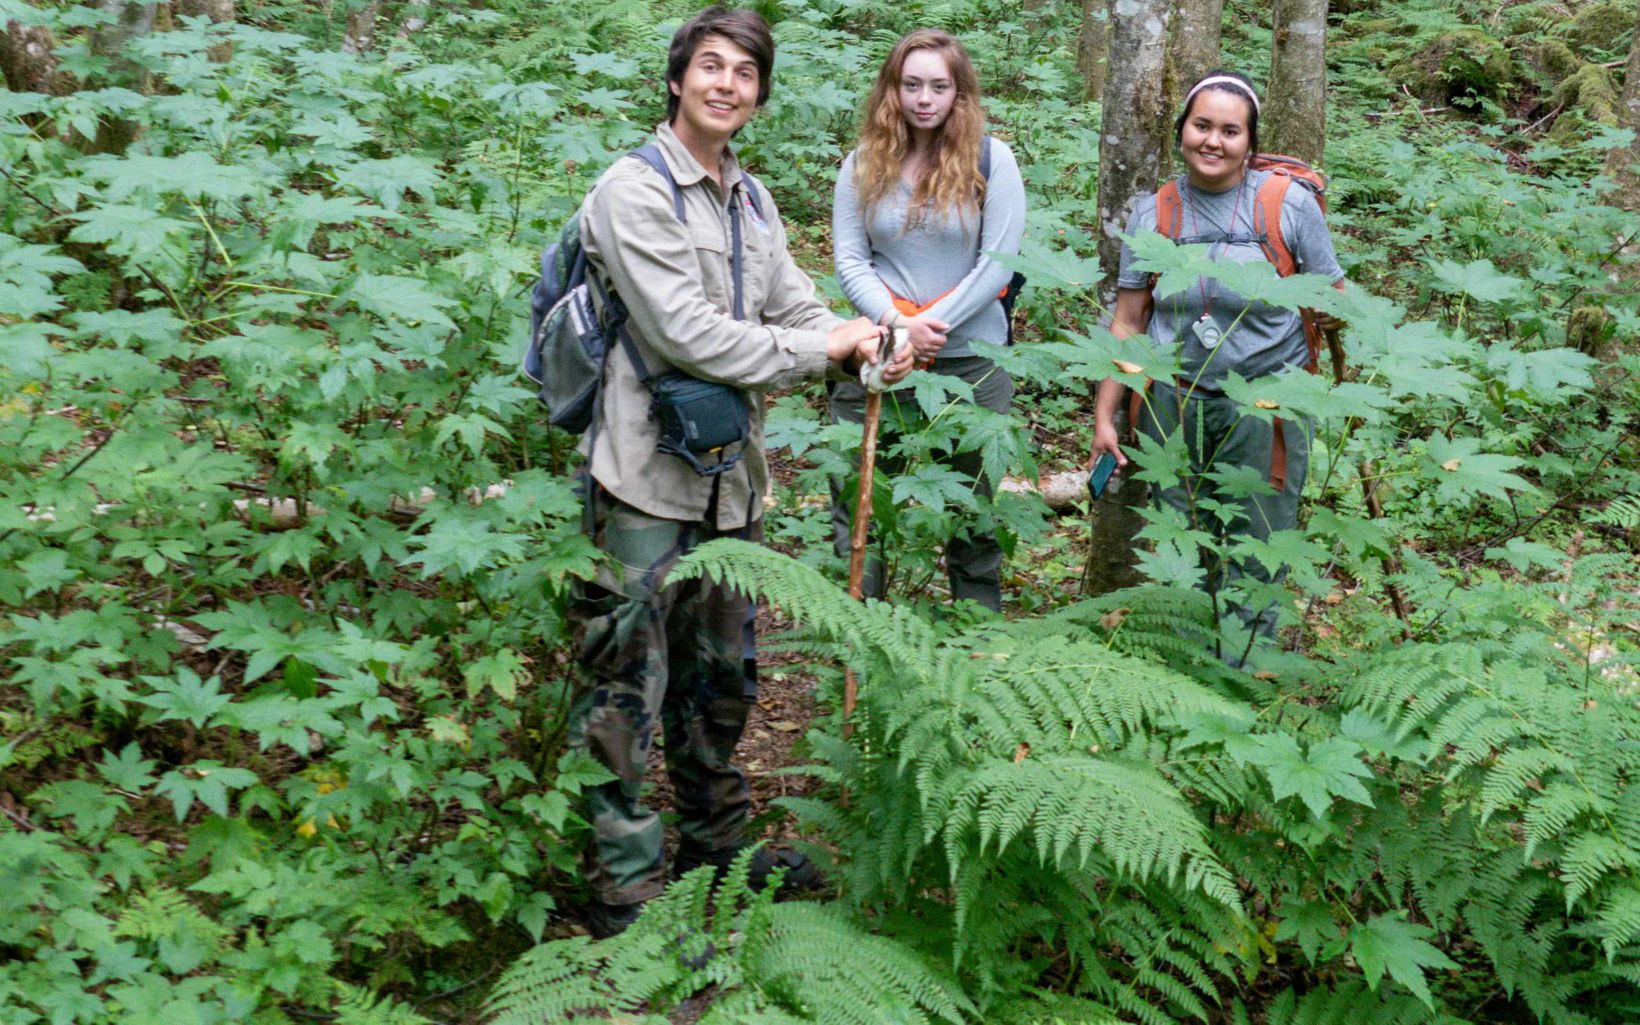 Young Crew Students in our partner TRAYLS youth education program in natural resource management visit a second-growth forest. © Ian Johnson/SSP